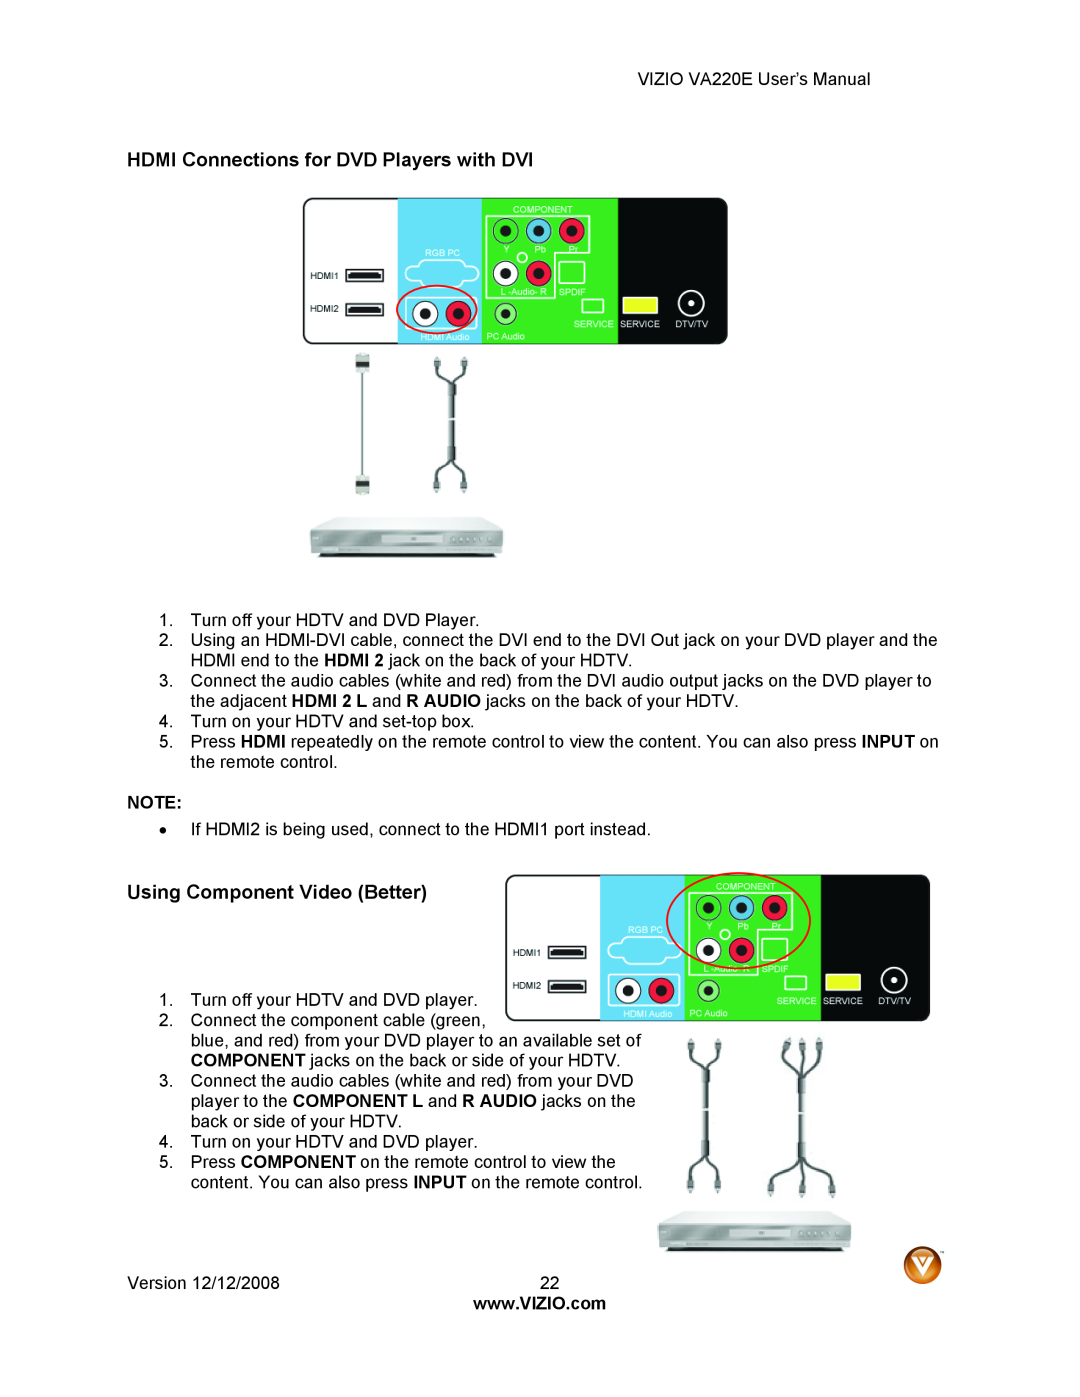 Vizio VA220E user manual HDMI Connections for DVD Players with DVI, Using Component Video Better 